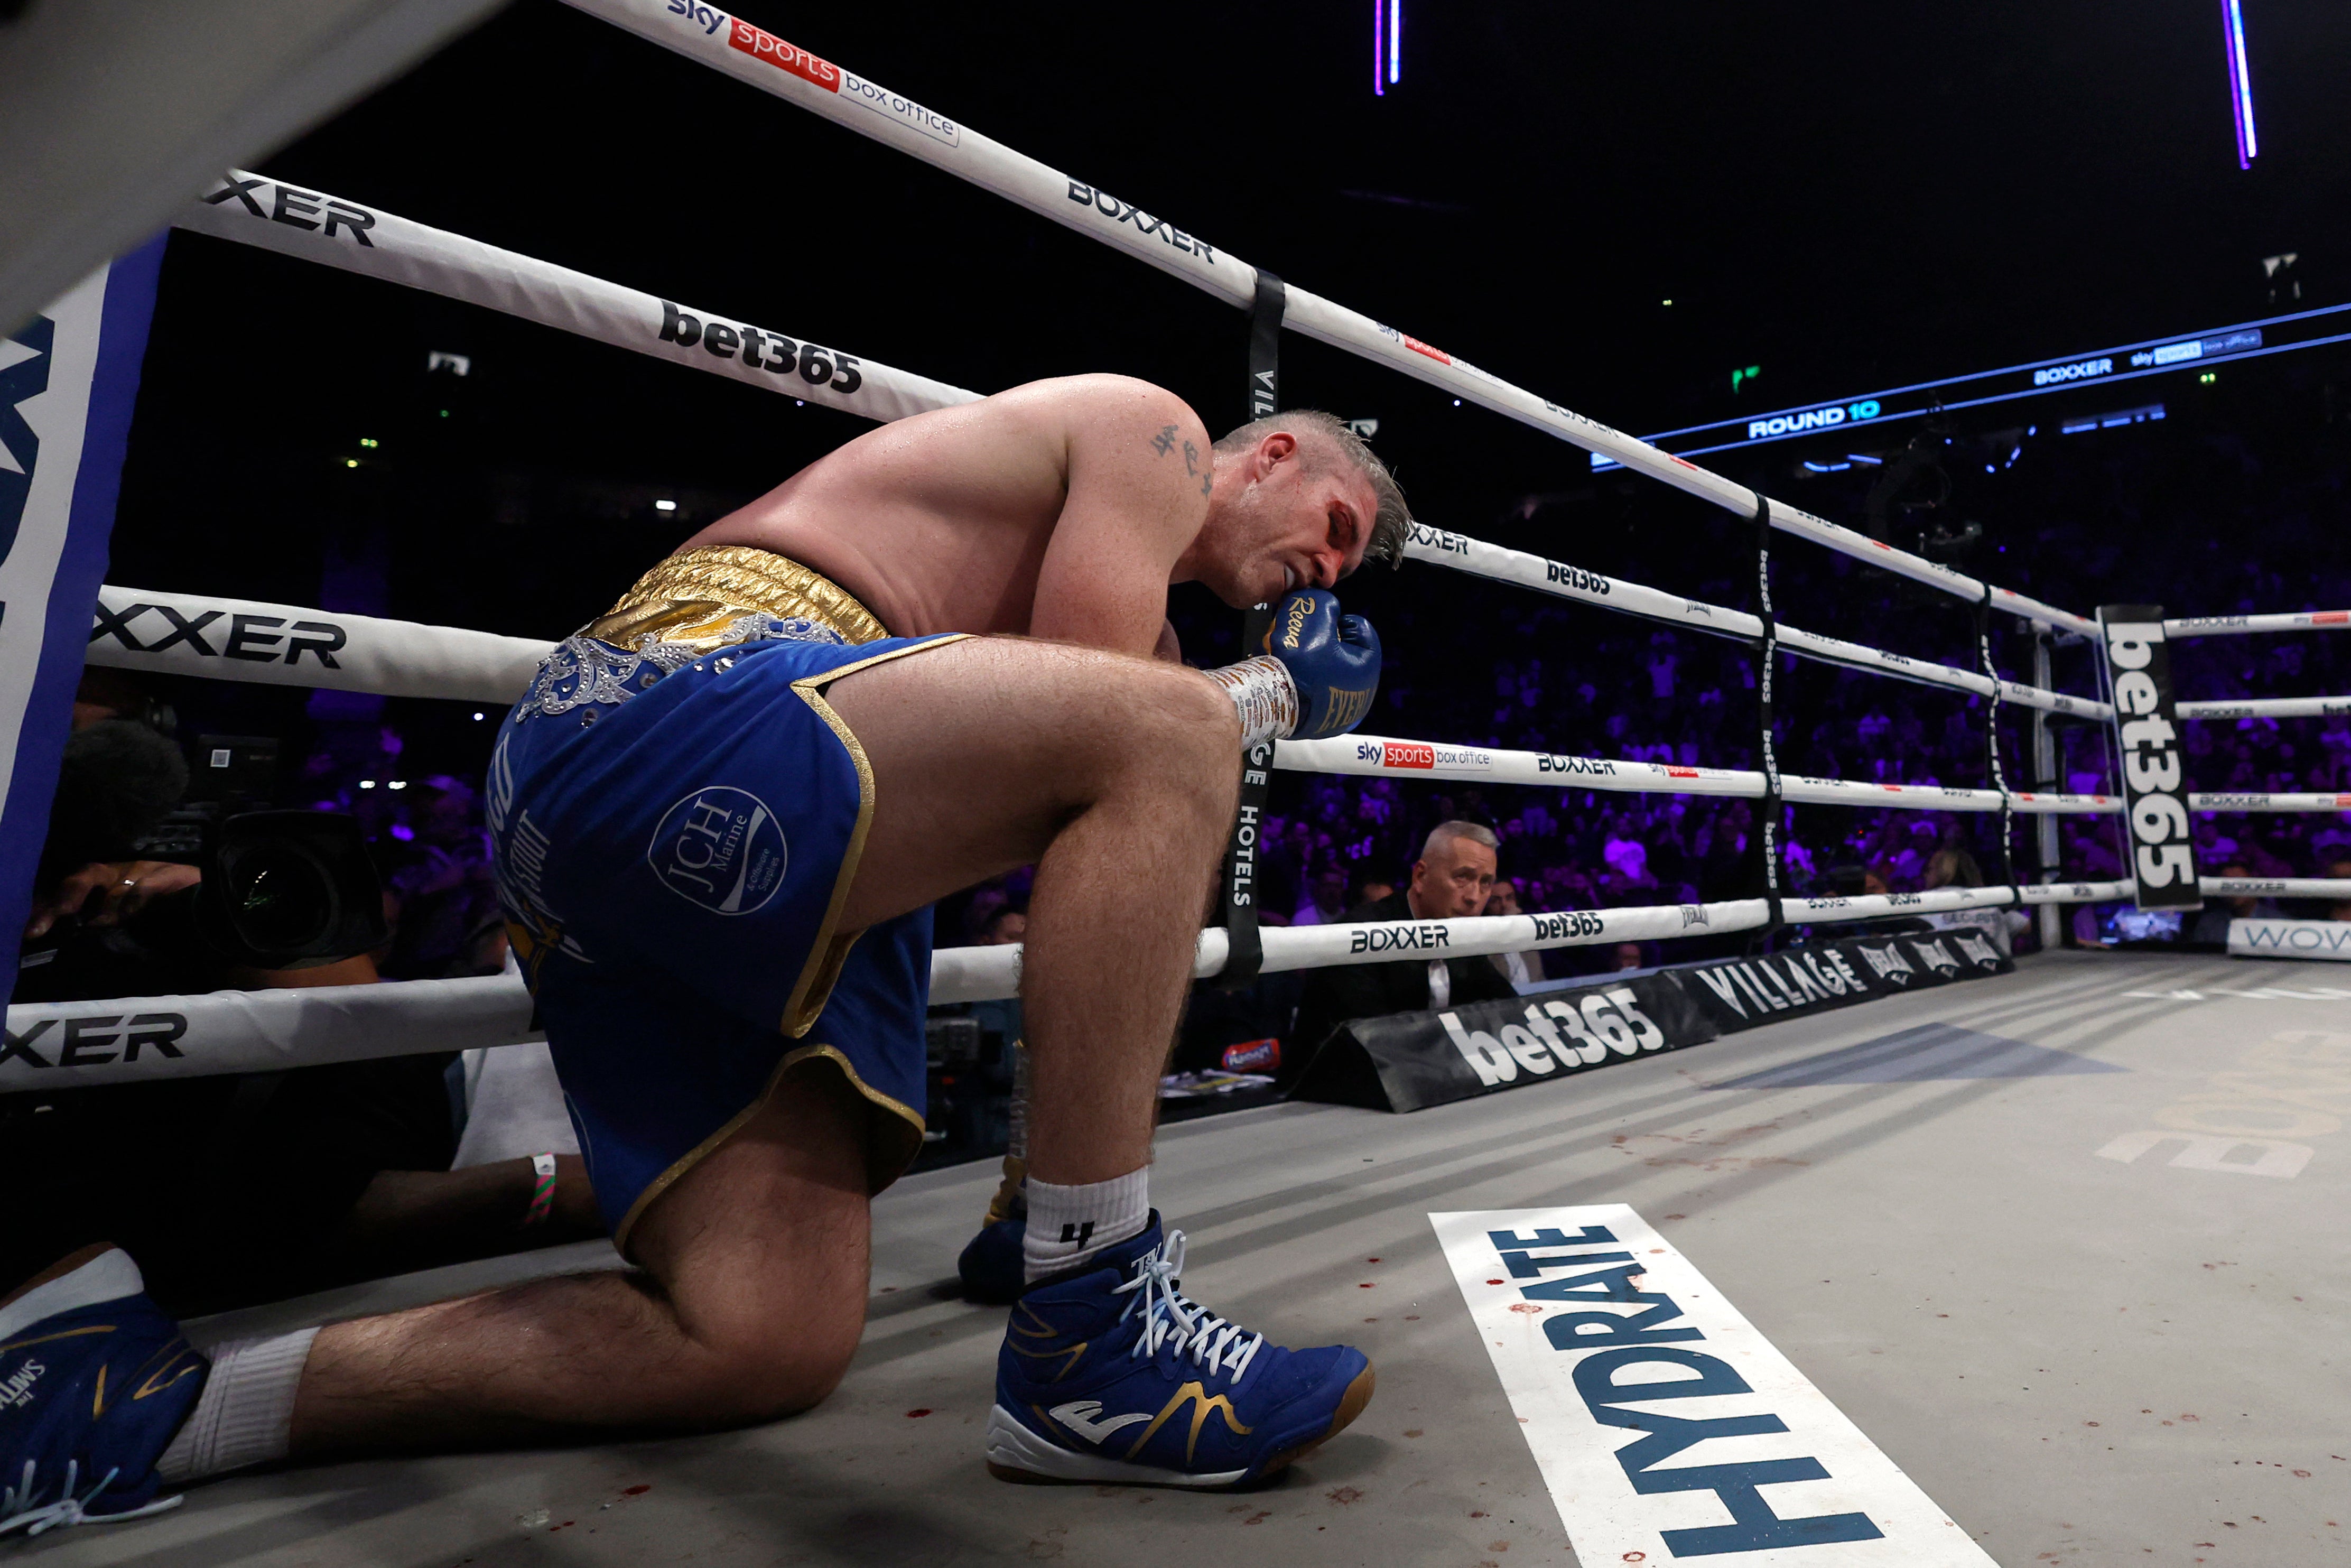 Smith moments prior to the end of the fight